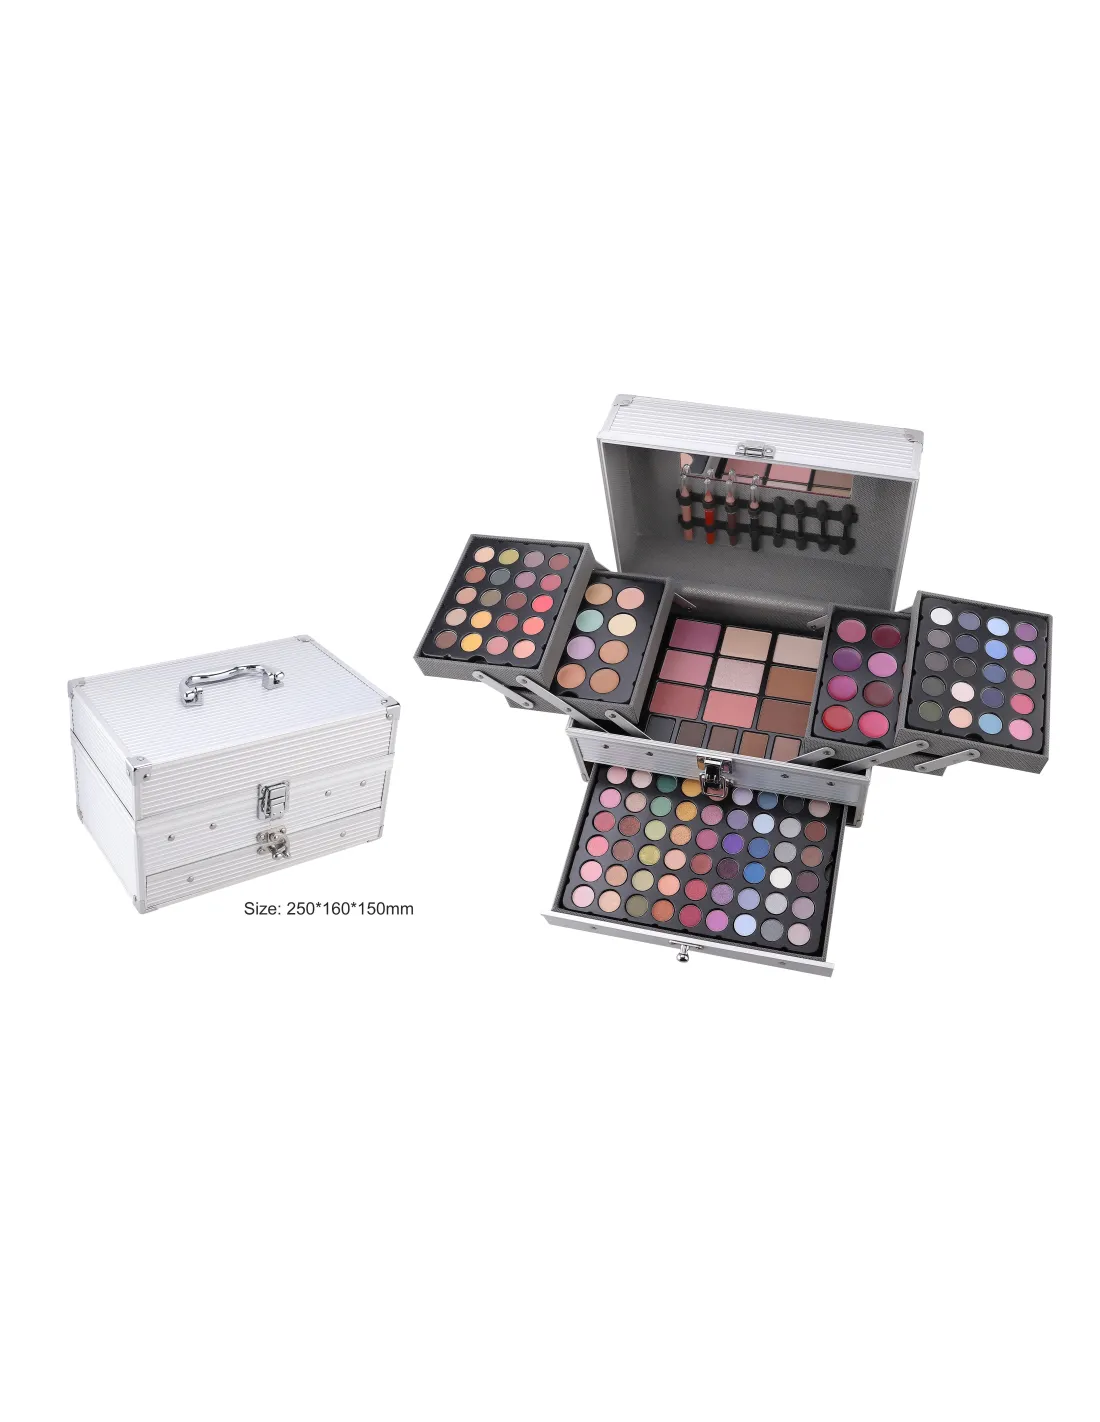 Maletín Maquillaje Profesional Travel Mya 168 Colores